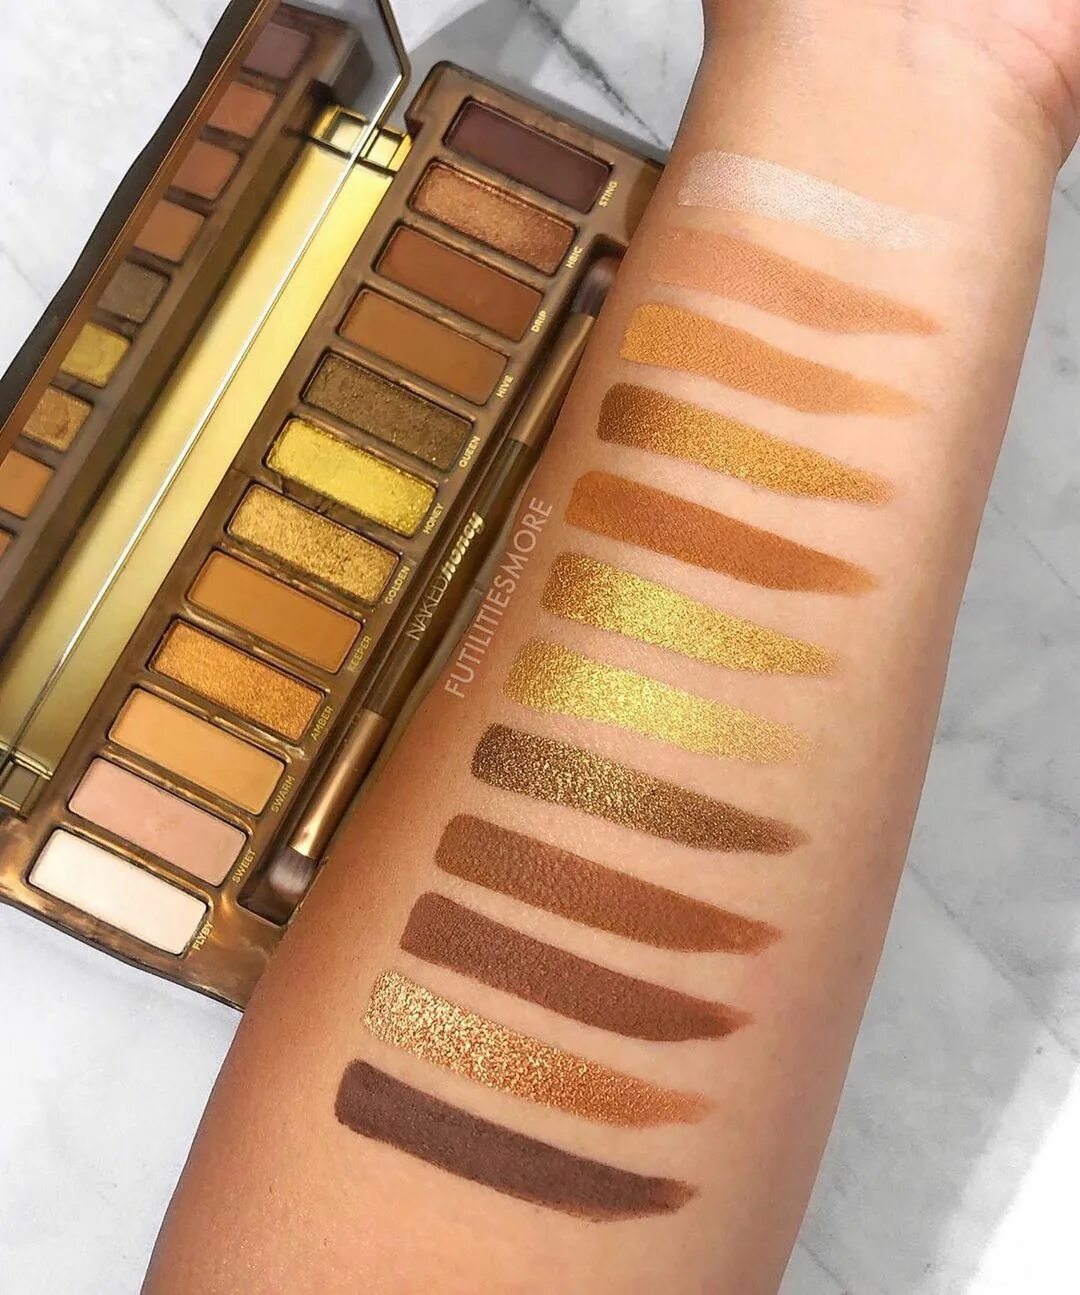 NAKED Honey Eyeshadow Palette, immediately swatches every shade* 🤤 Which s...